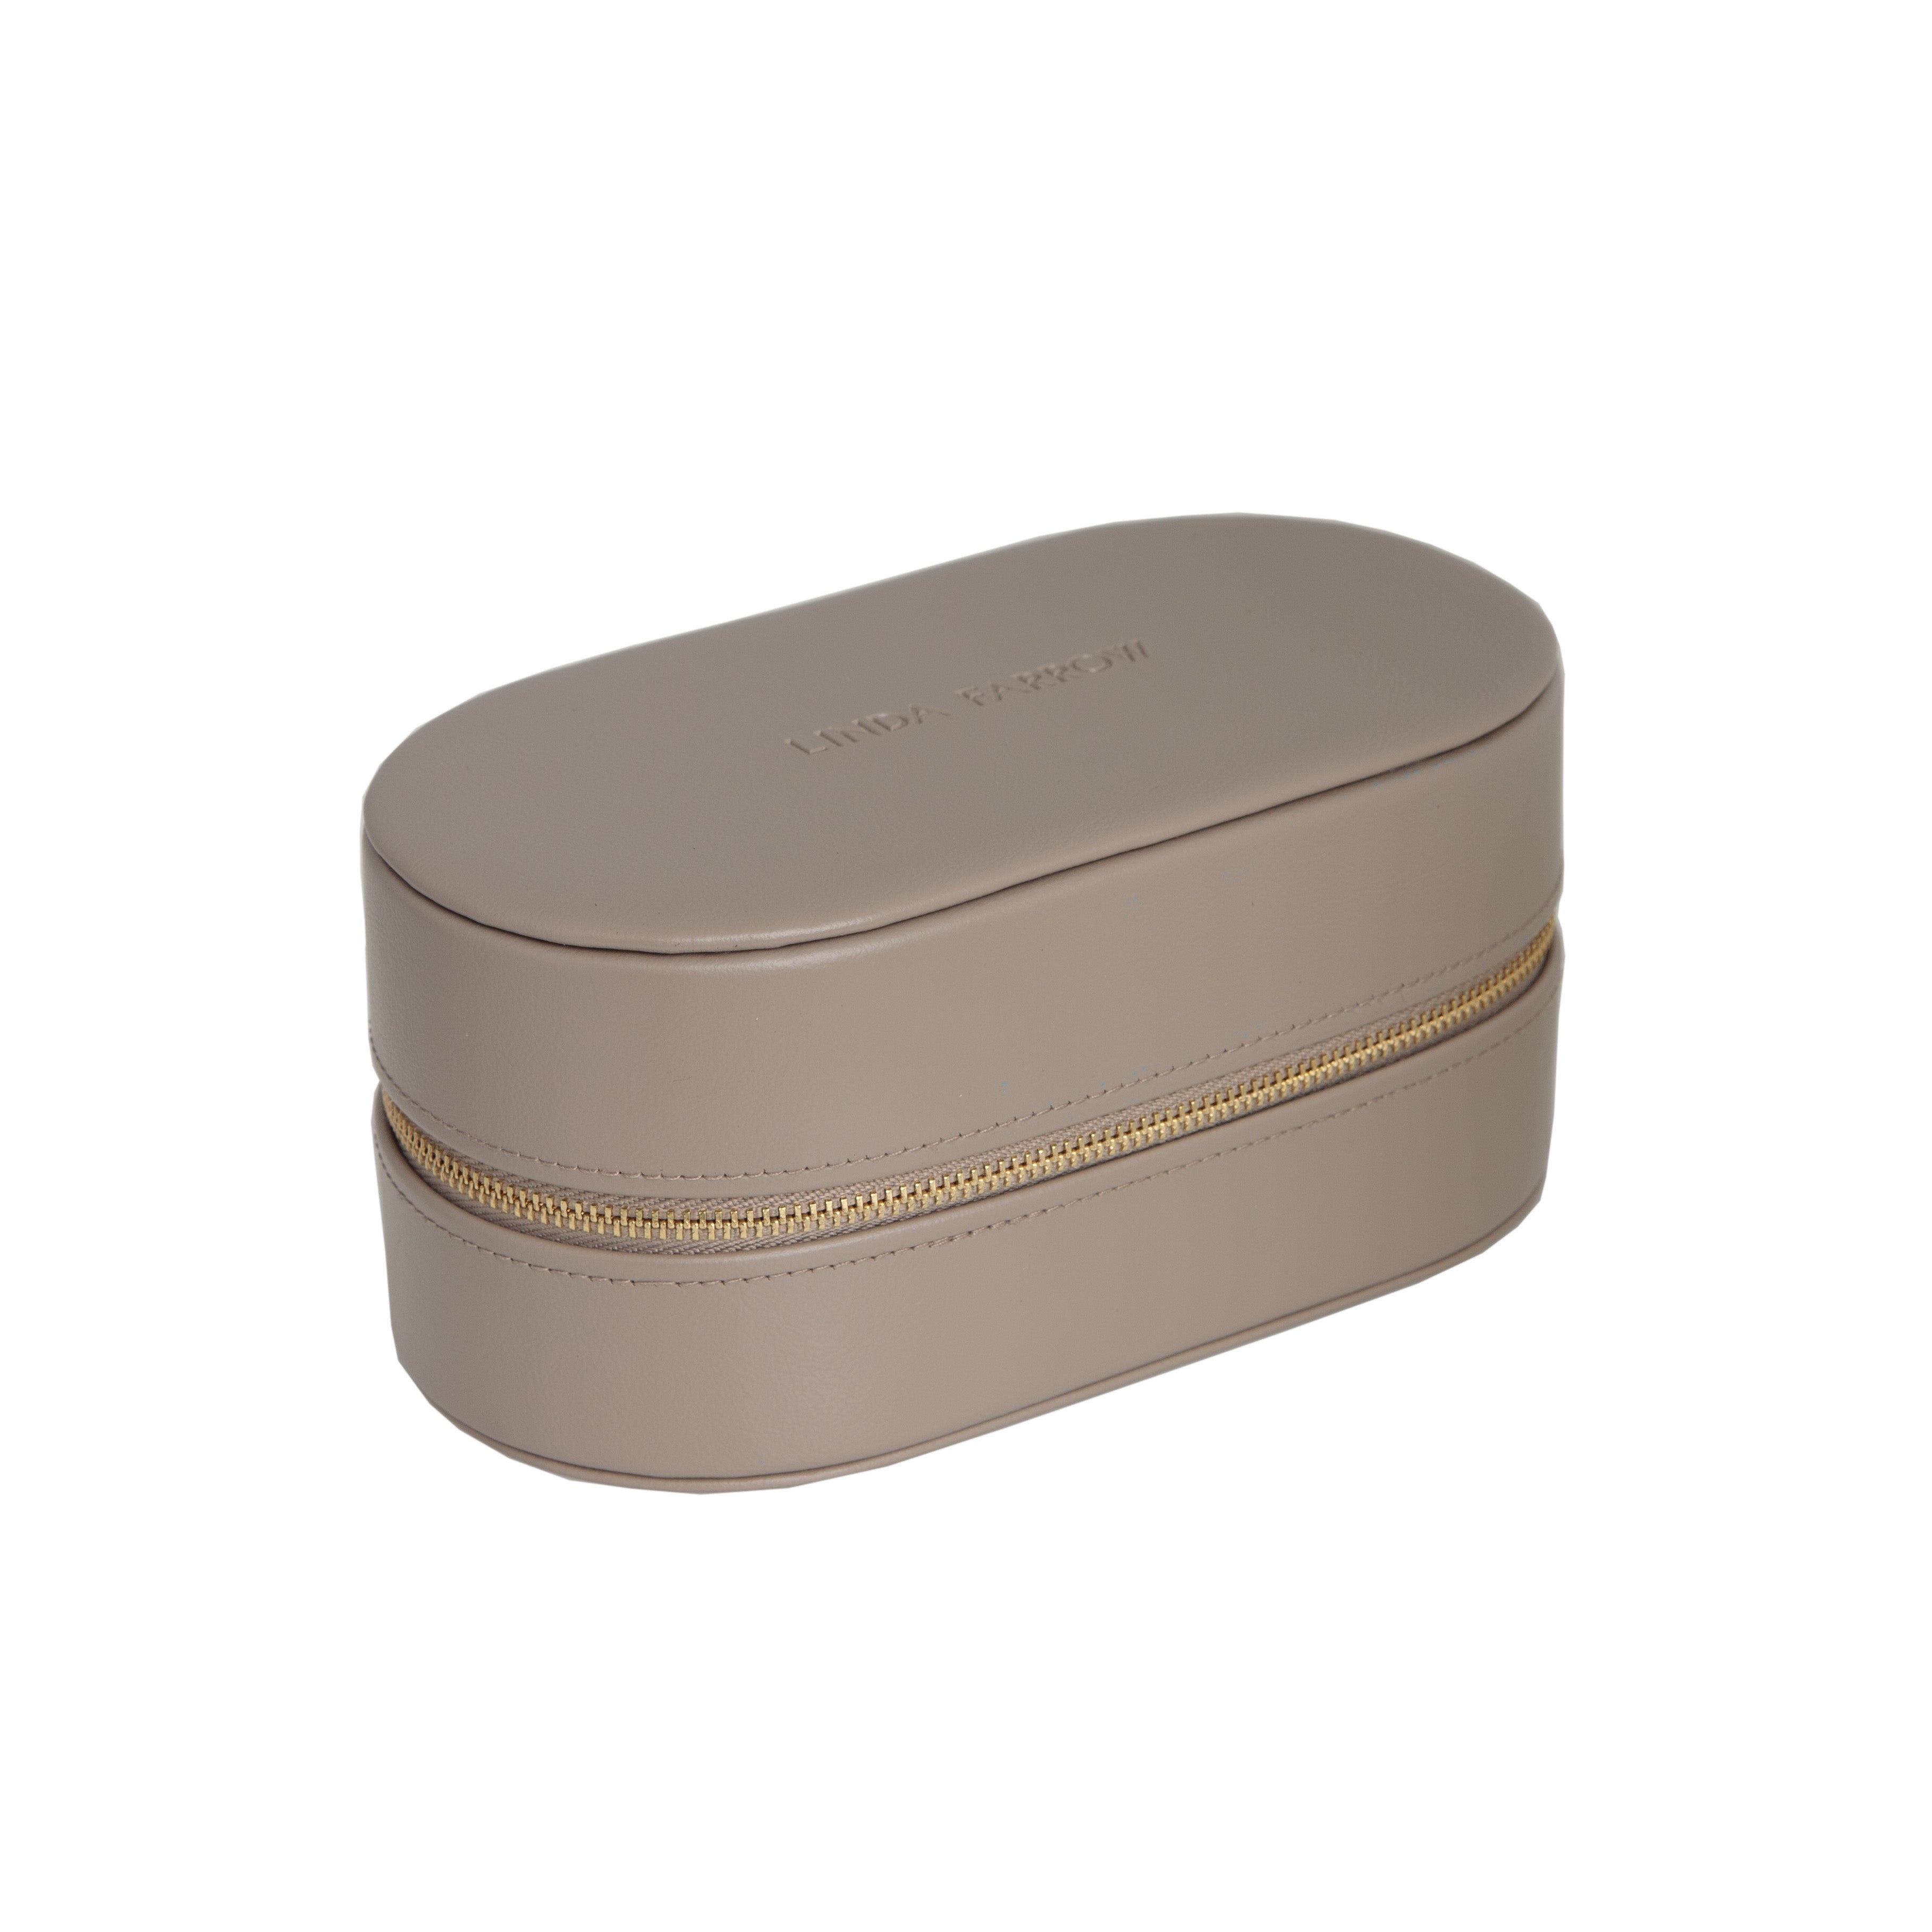 LINDA FARROW OVAL TRAVEL CASE IN TAUPE - 2